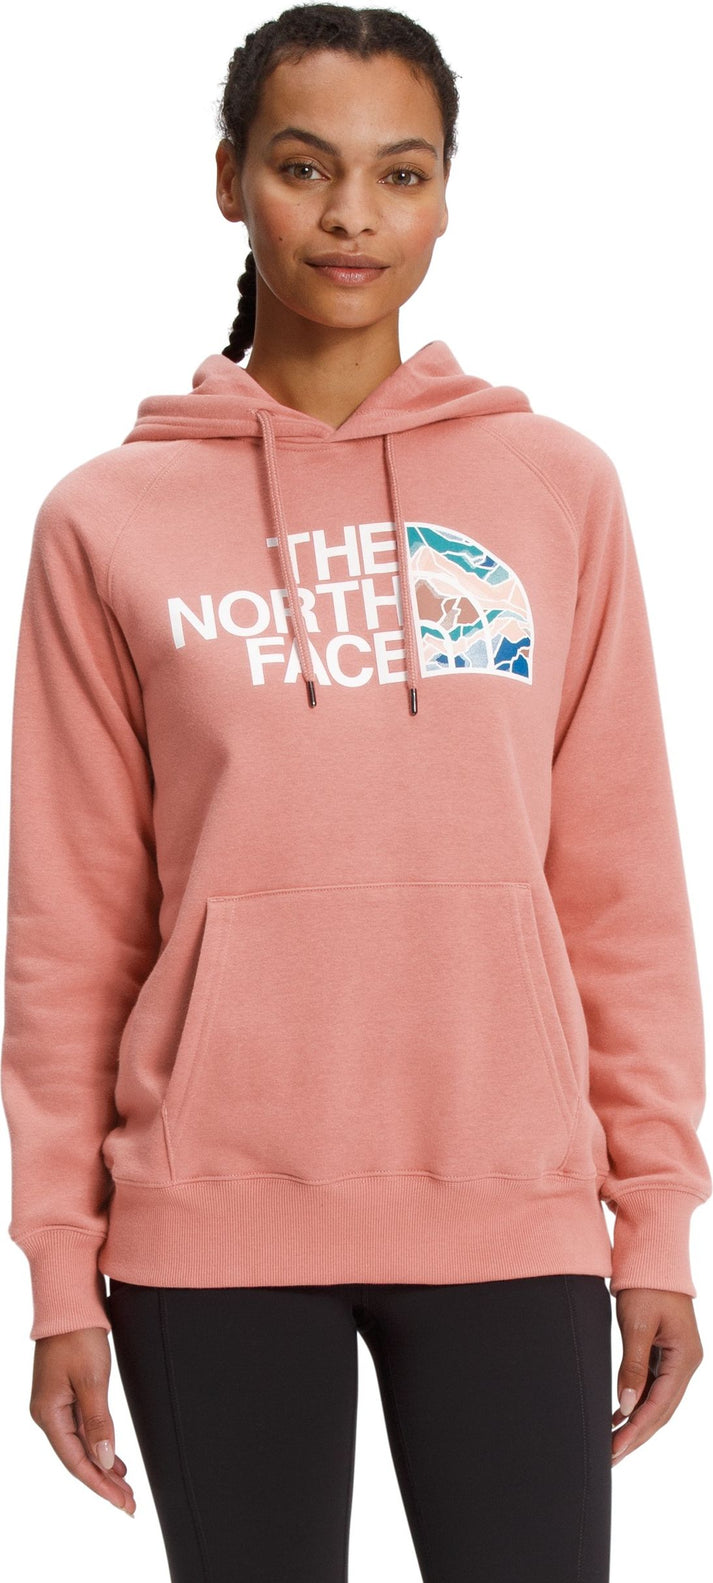 The North Face Apparel Women's Half Dome Pullover Hoodie Rose Dawn